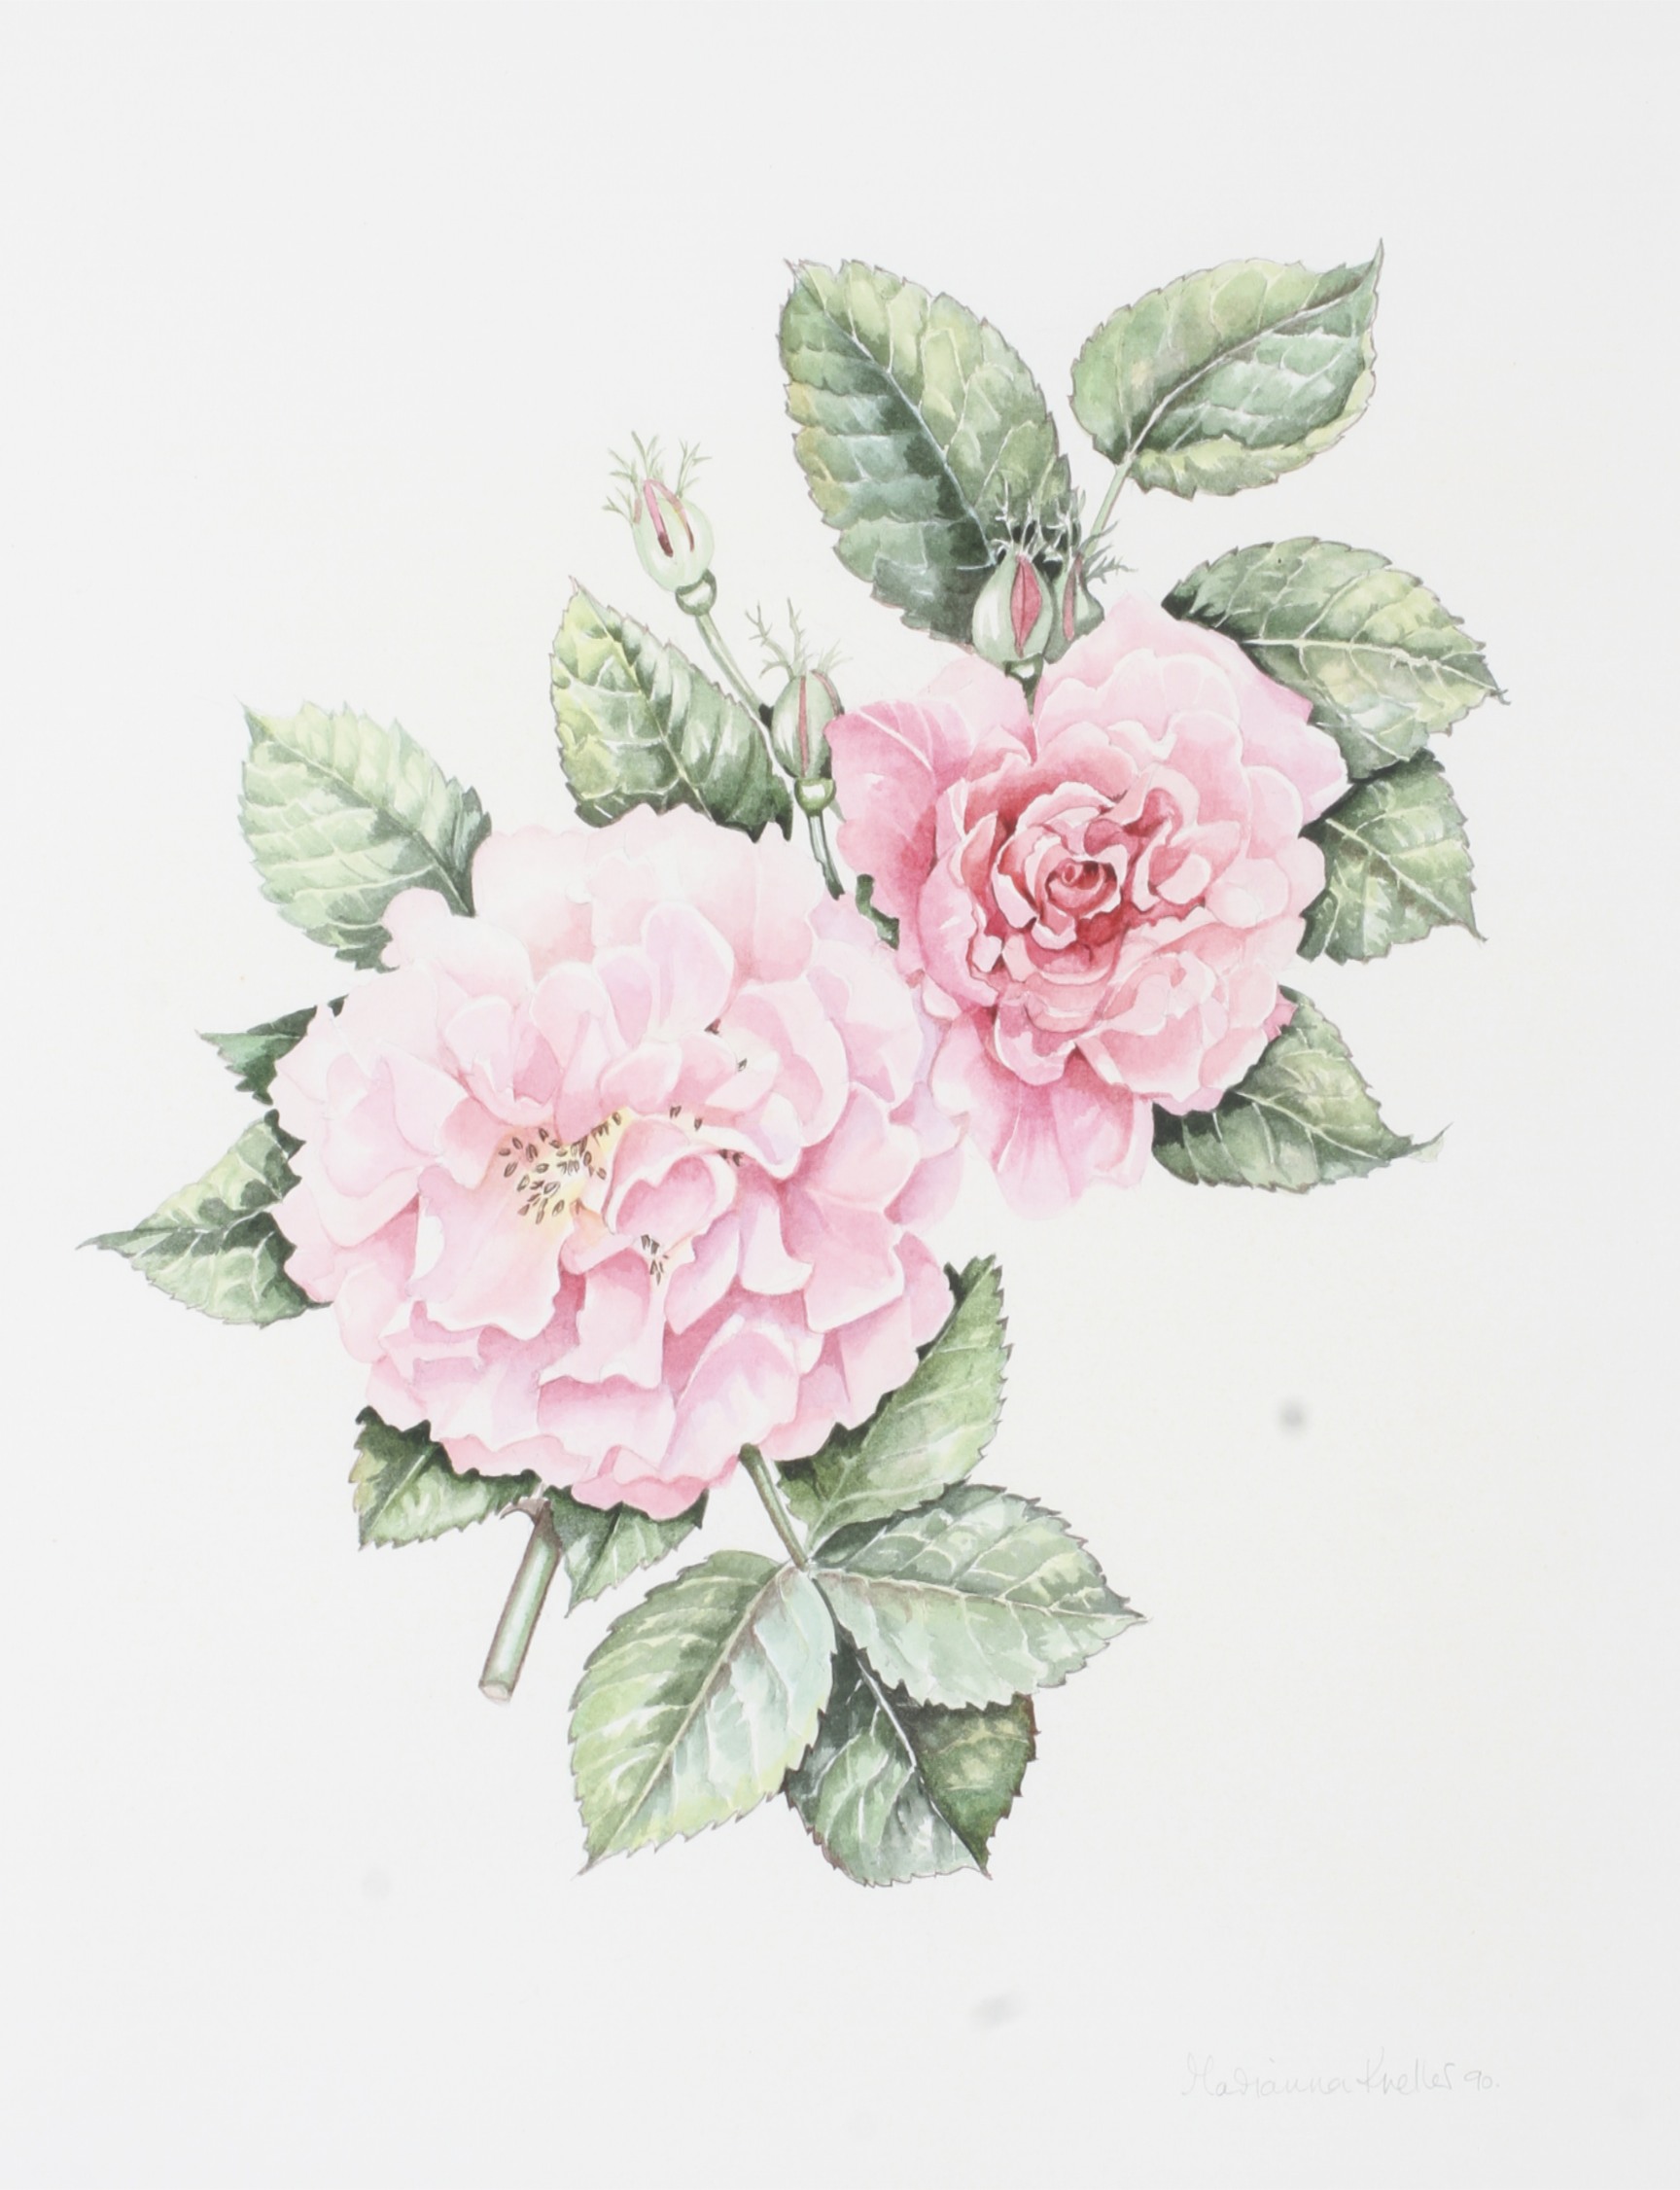 Marianna Kneller, a study of a pink rose spray, watercolour.